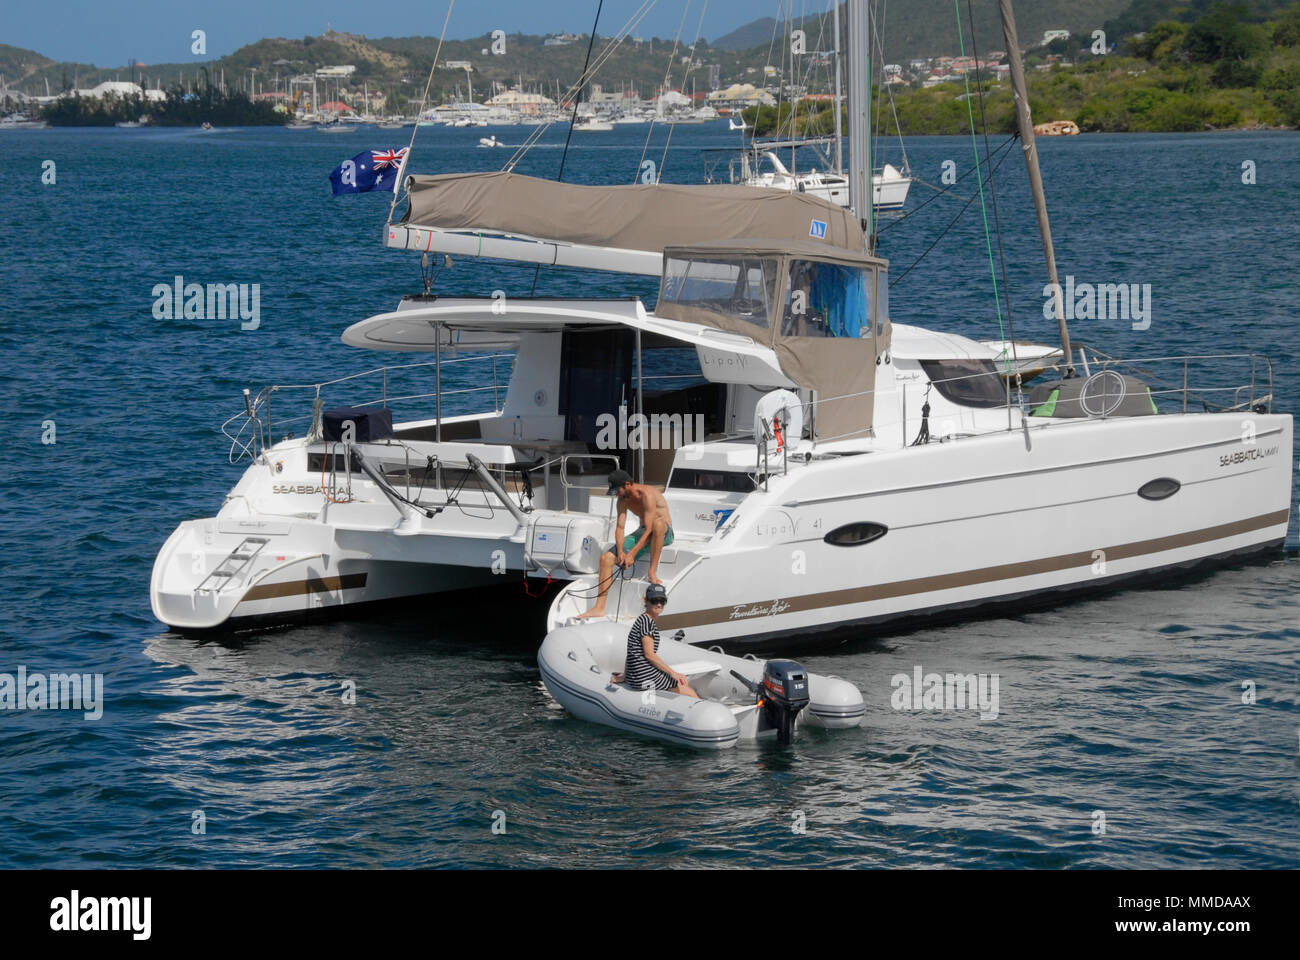 Young couple launching/retrieving inflatable dinghy with outboard motor from white catamaran, Simpson Bay, St Martin, Caribbean Stock Photo